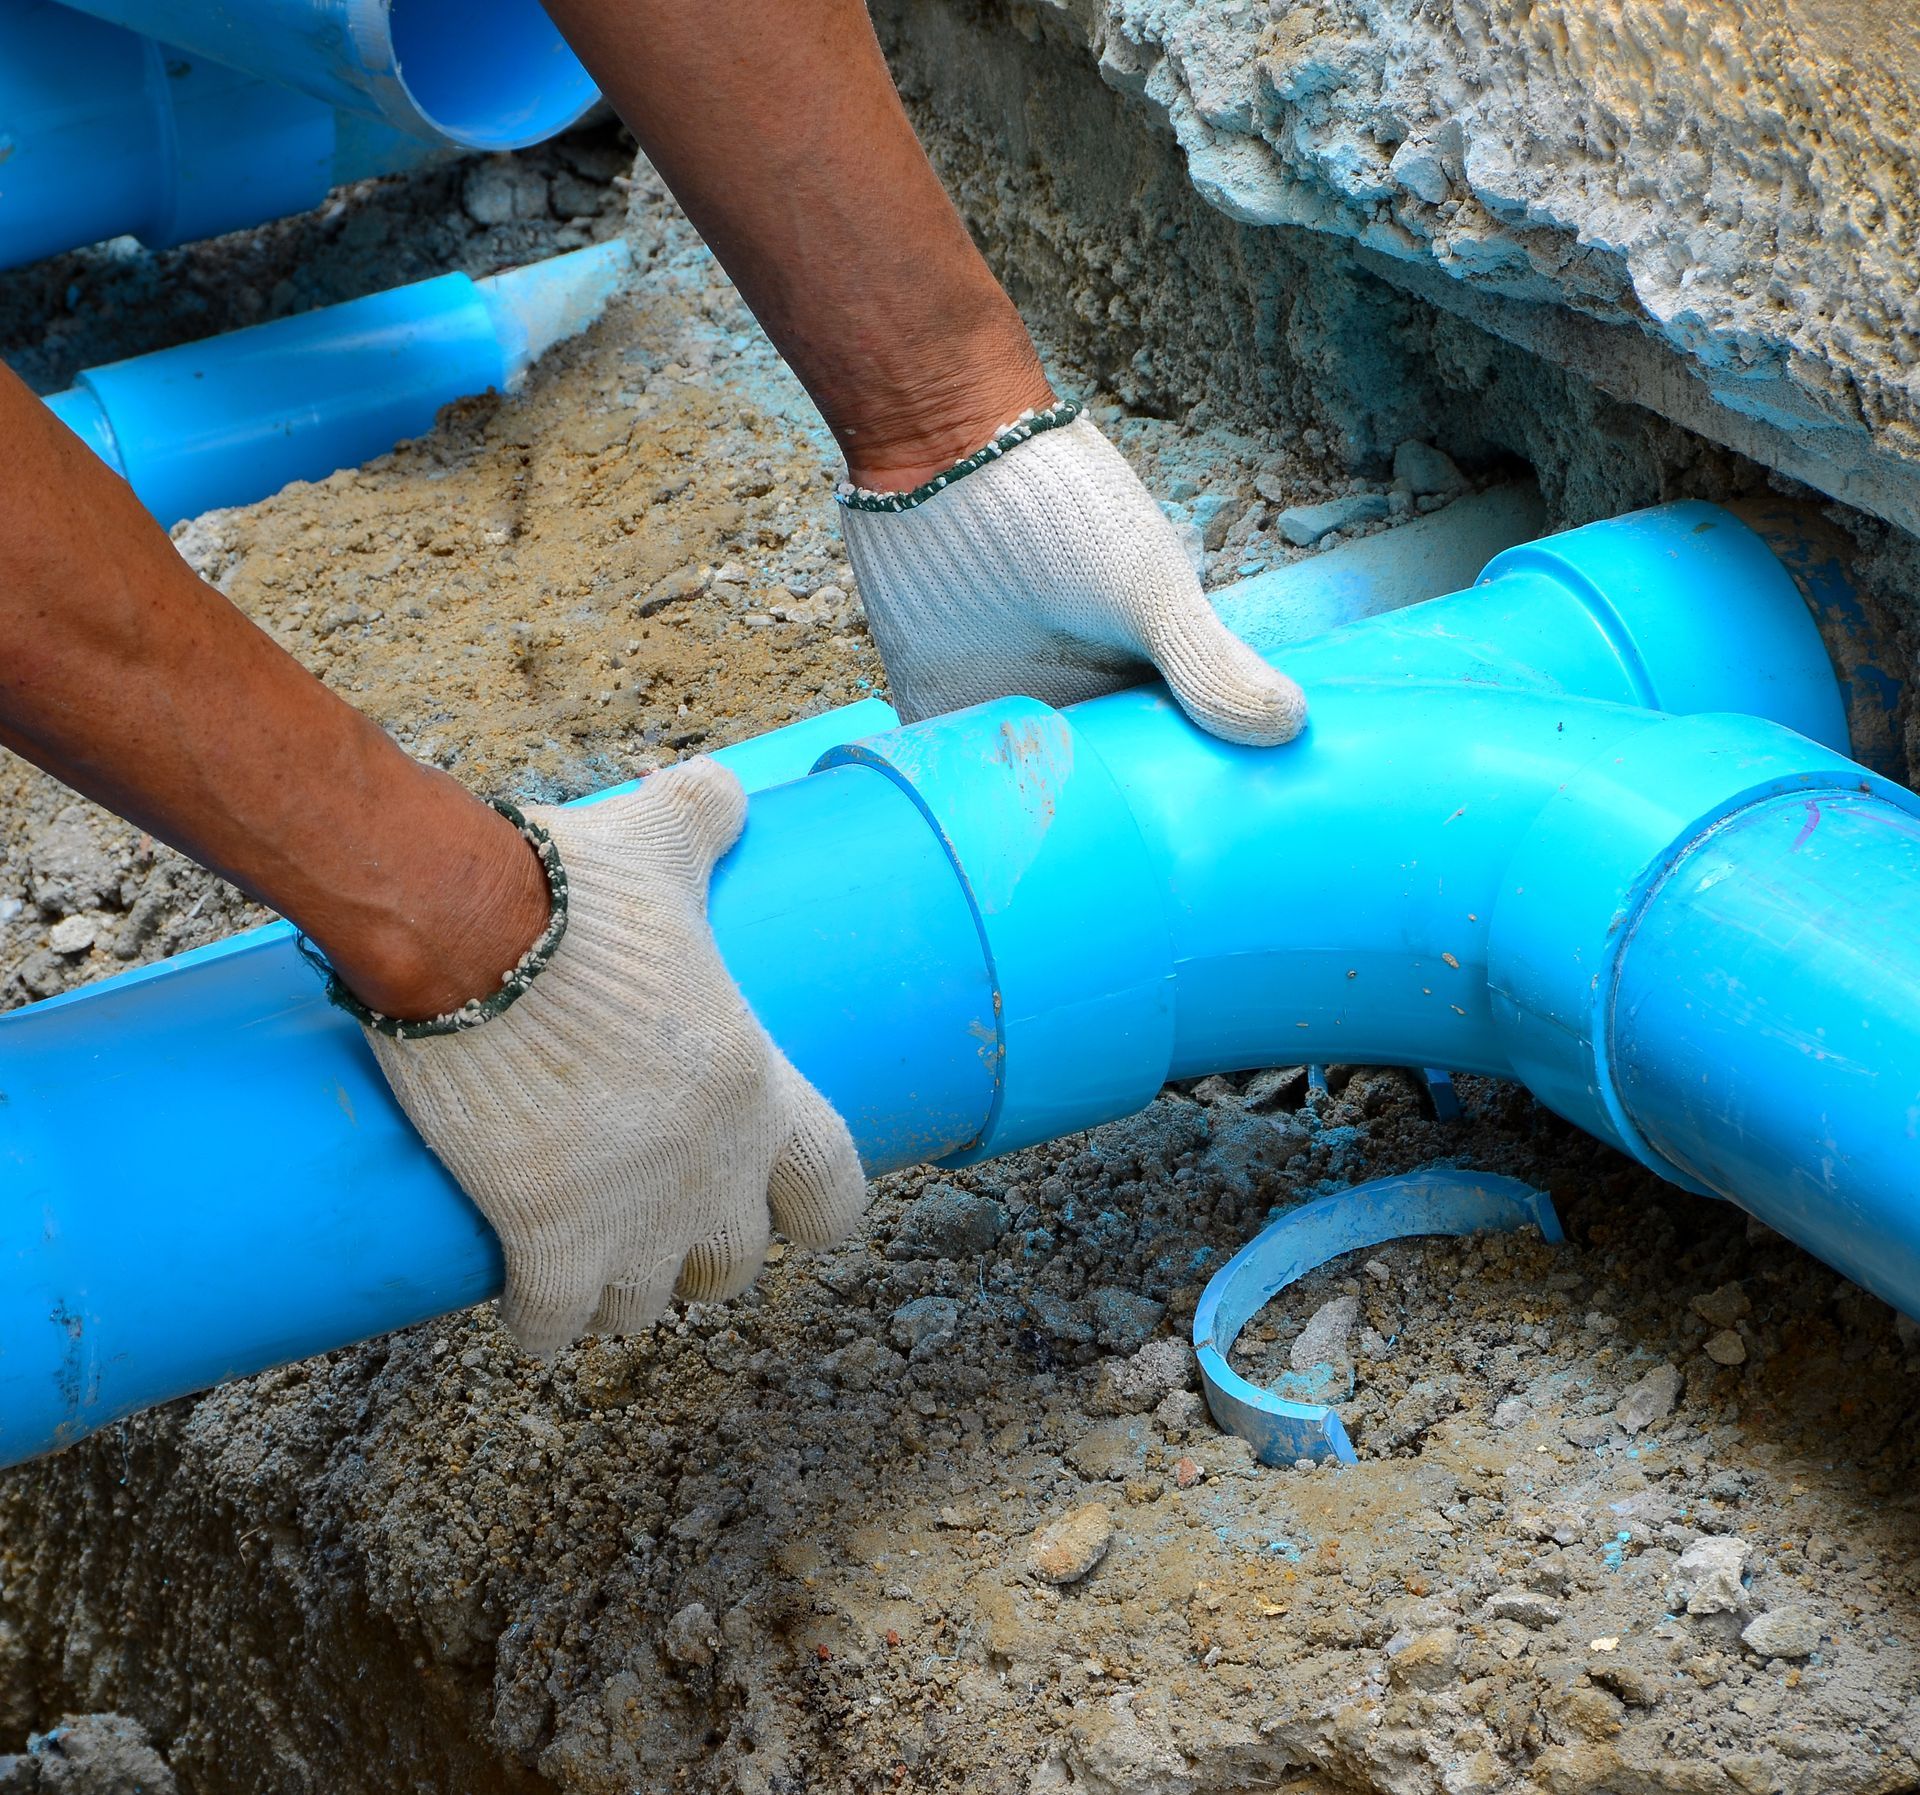 Plumber holding a big blue pipe